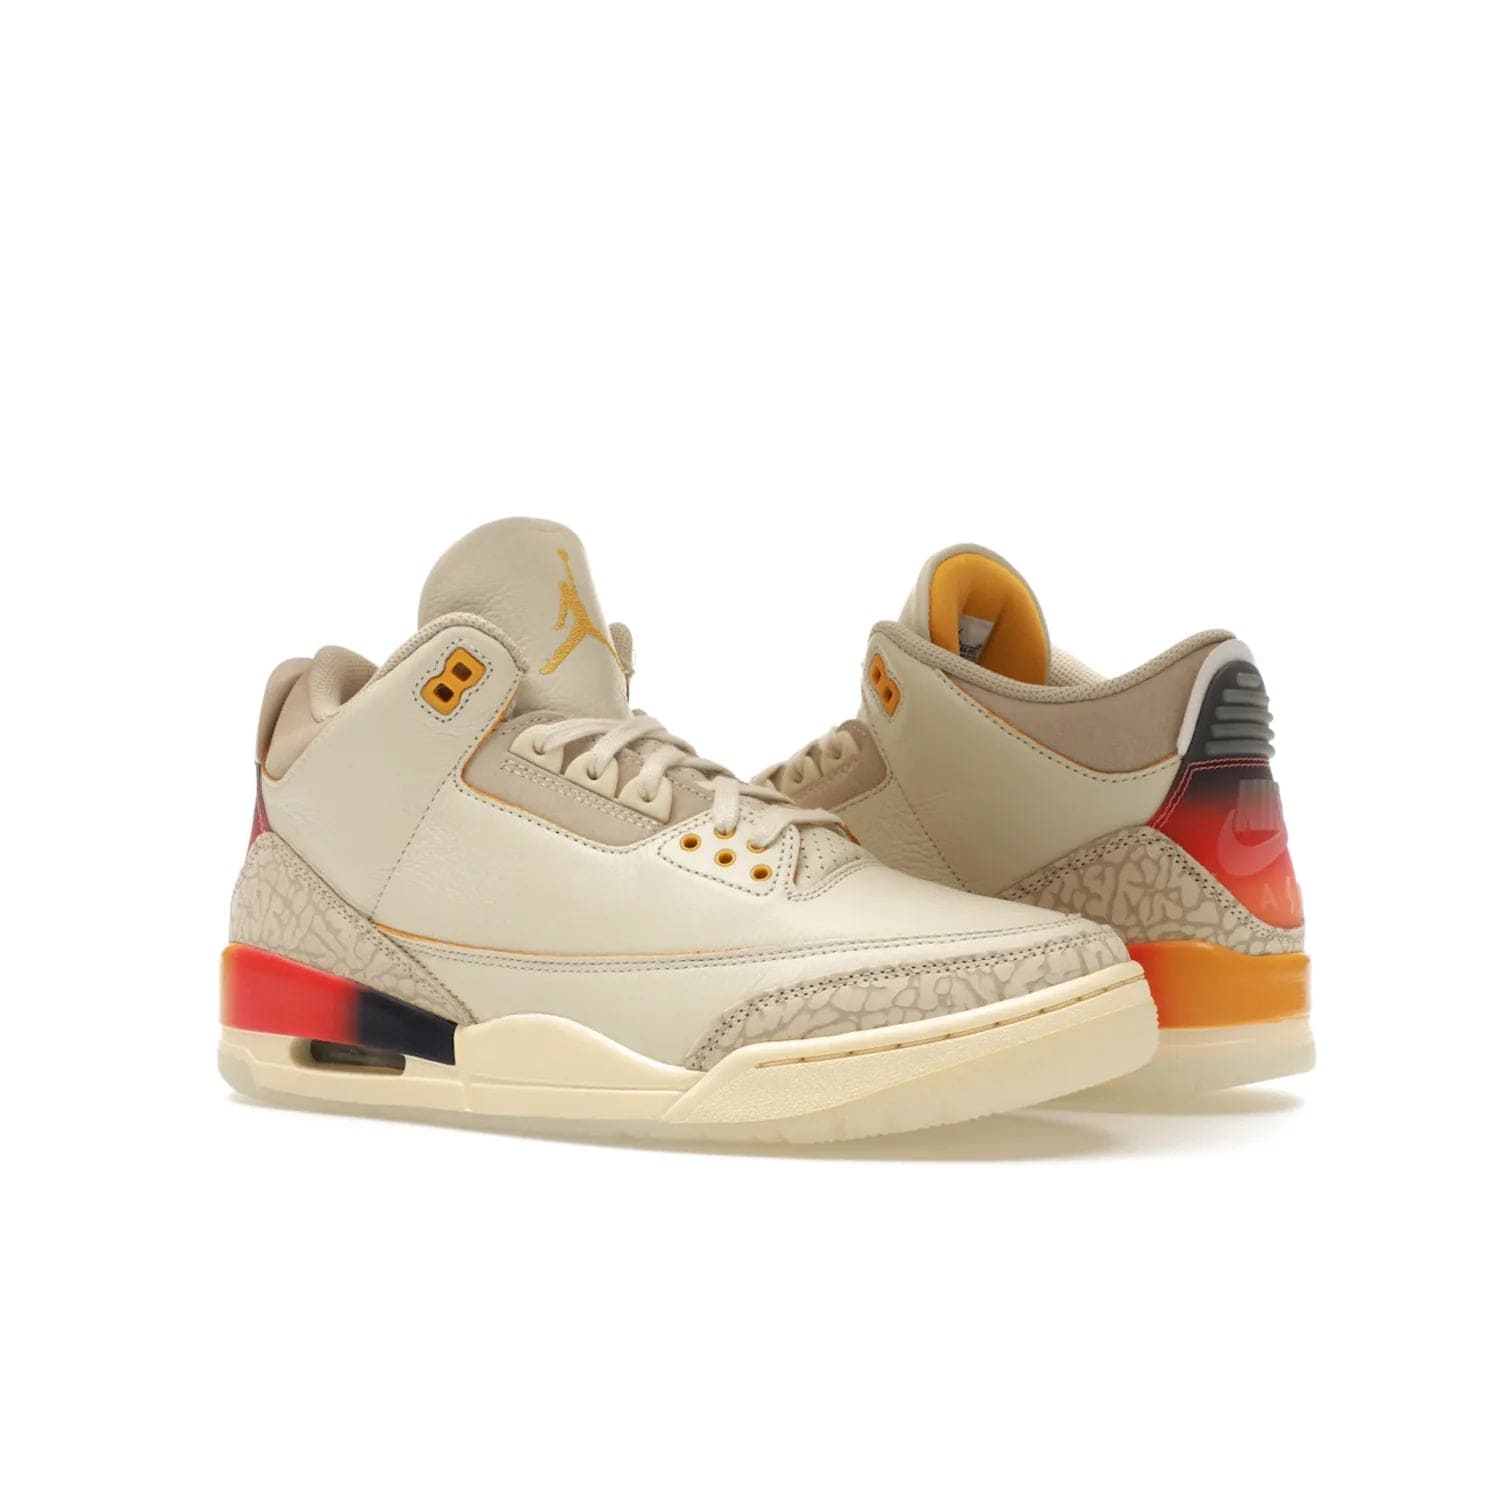 Jordan 3 Retro SP J Balvin Medellín Sunset - Image 4 - Only at www.BallersClubKickz.com - J Balvin x Jordan 3 Retro SP: Celebrate the joy of life with a colorful, homage to the electrifying reggaeton culture and iconic Jordan 3. Limited edition, Sept. 23. $250.